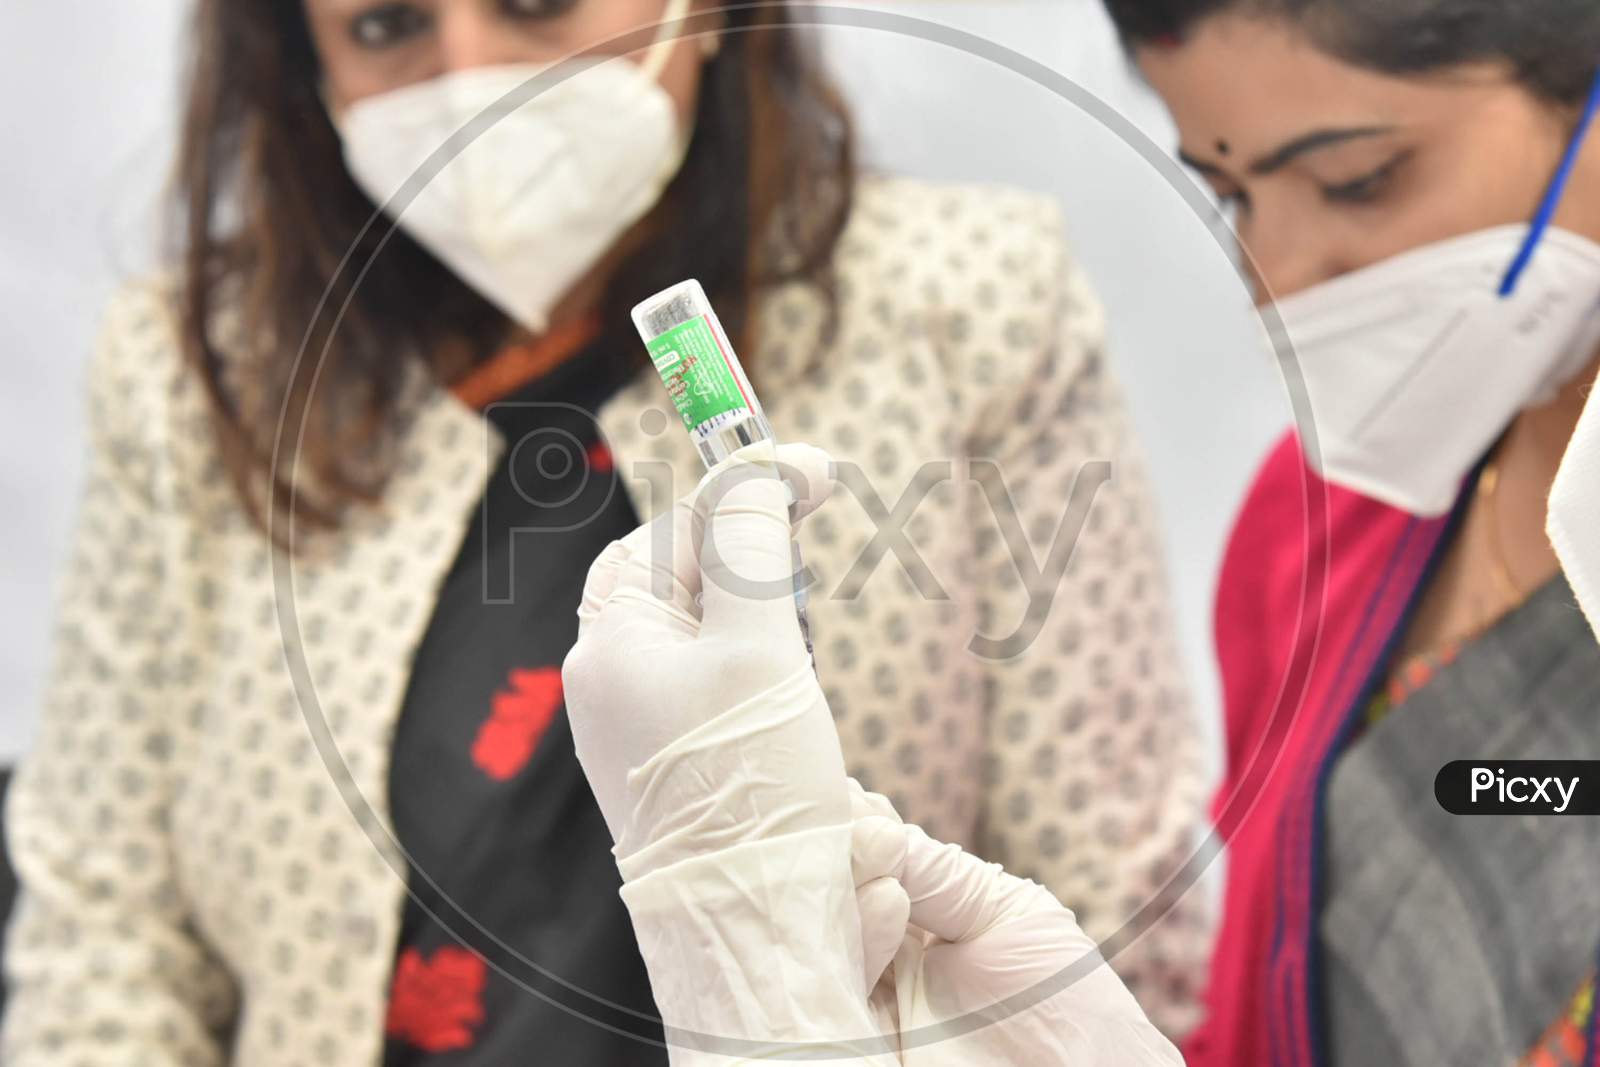 A medic shows a Covishield vaccine dose, after the virtual launch of COVID-19 vaccination drive by Prime Minister Narendra Modi, at GMCH hospital in Guwahati on Jan 16,2021